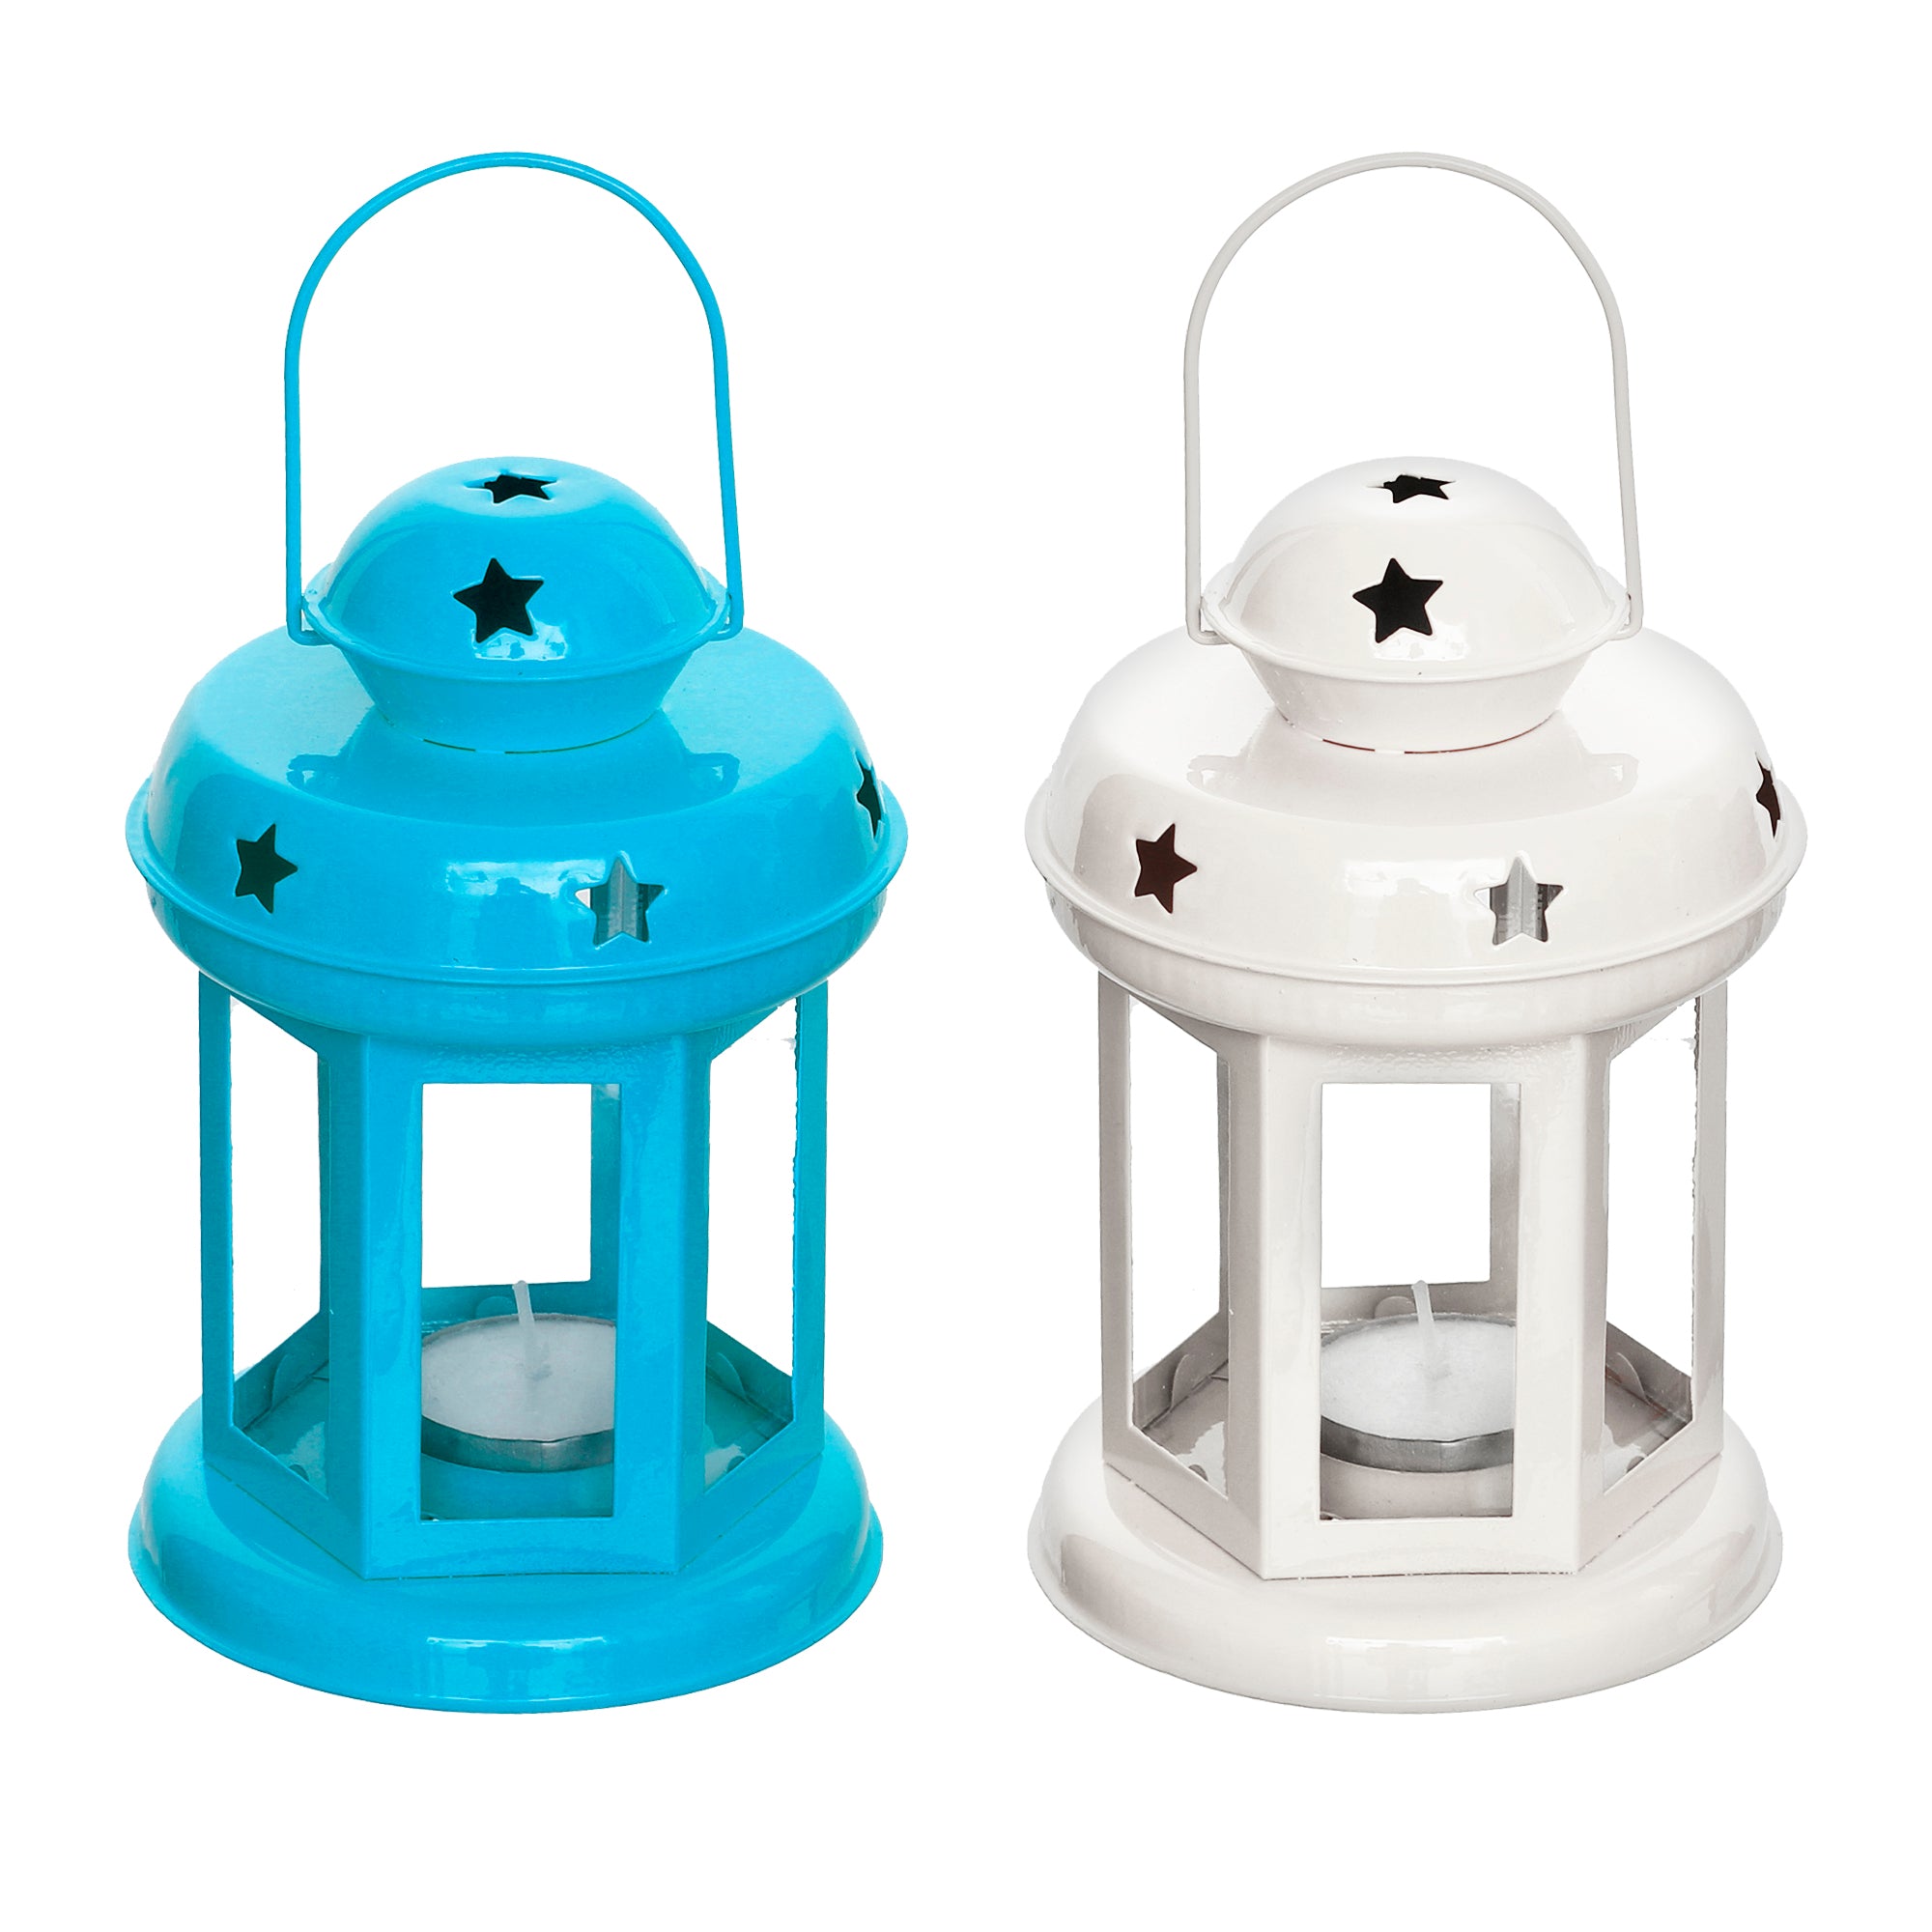 Set of 2 Blue and White Metal hanging Tea Light Candle Holder Lantern with Tealight Candle 5